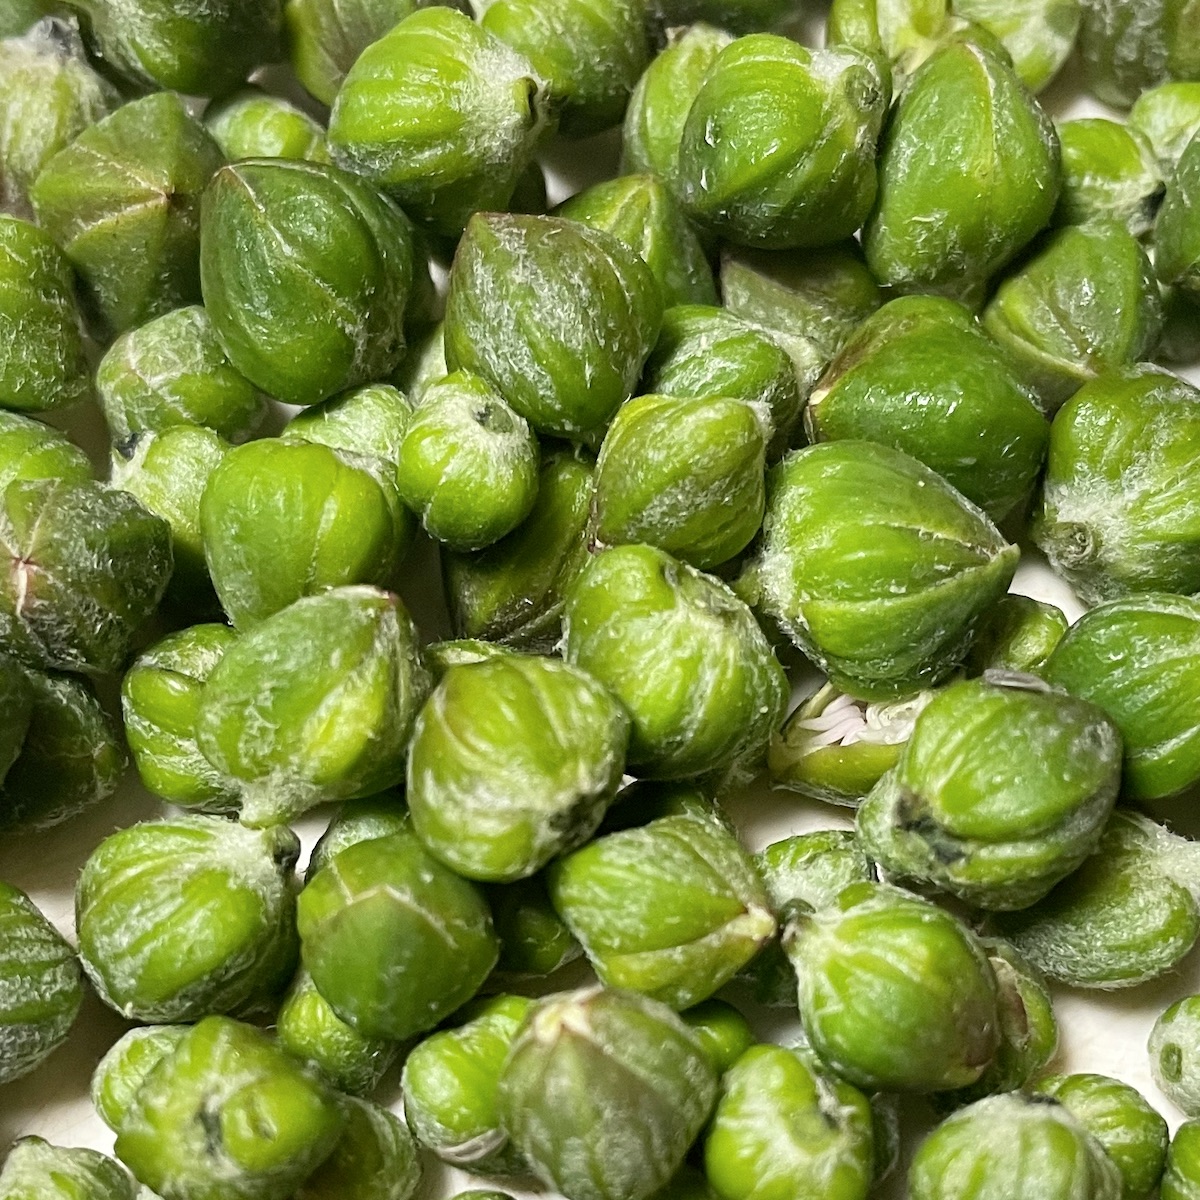 Harvested capers